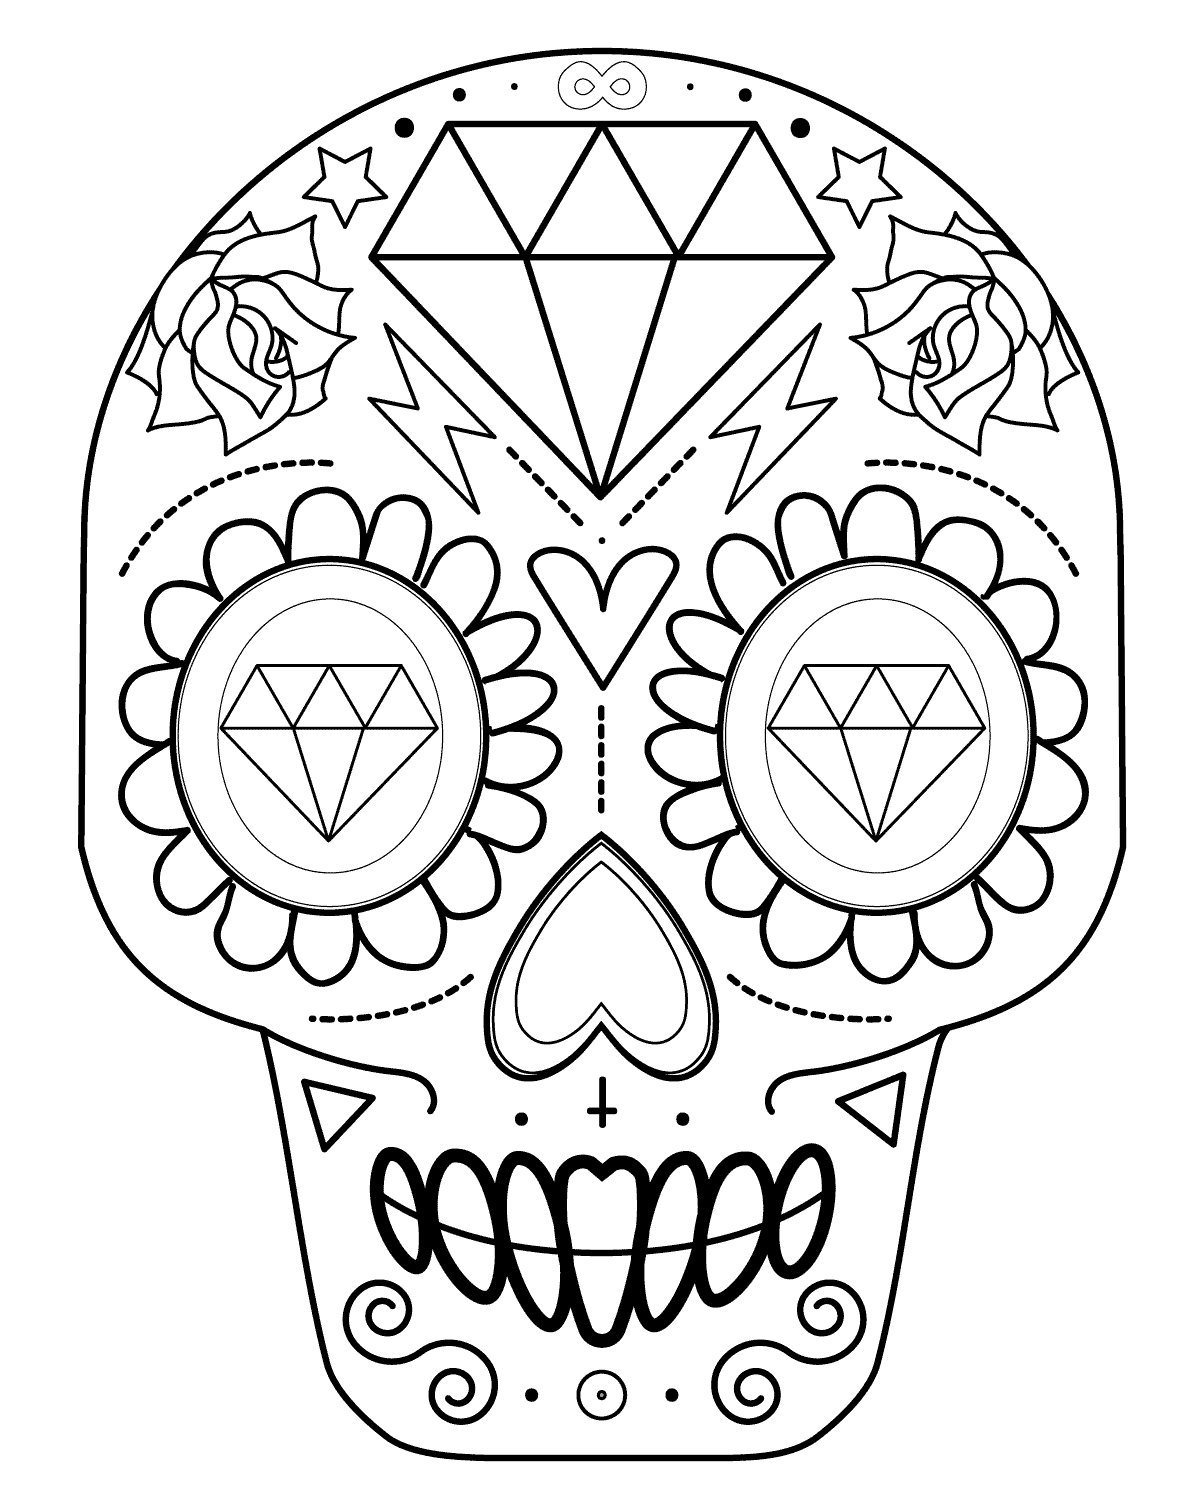 Sugar Skull with Diamonds Coloring Pages